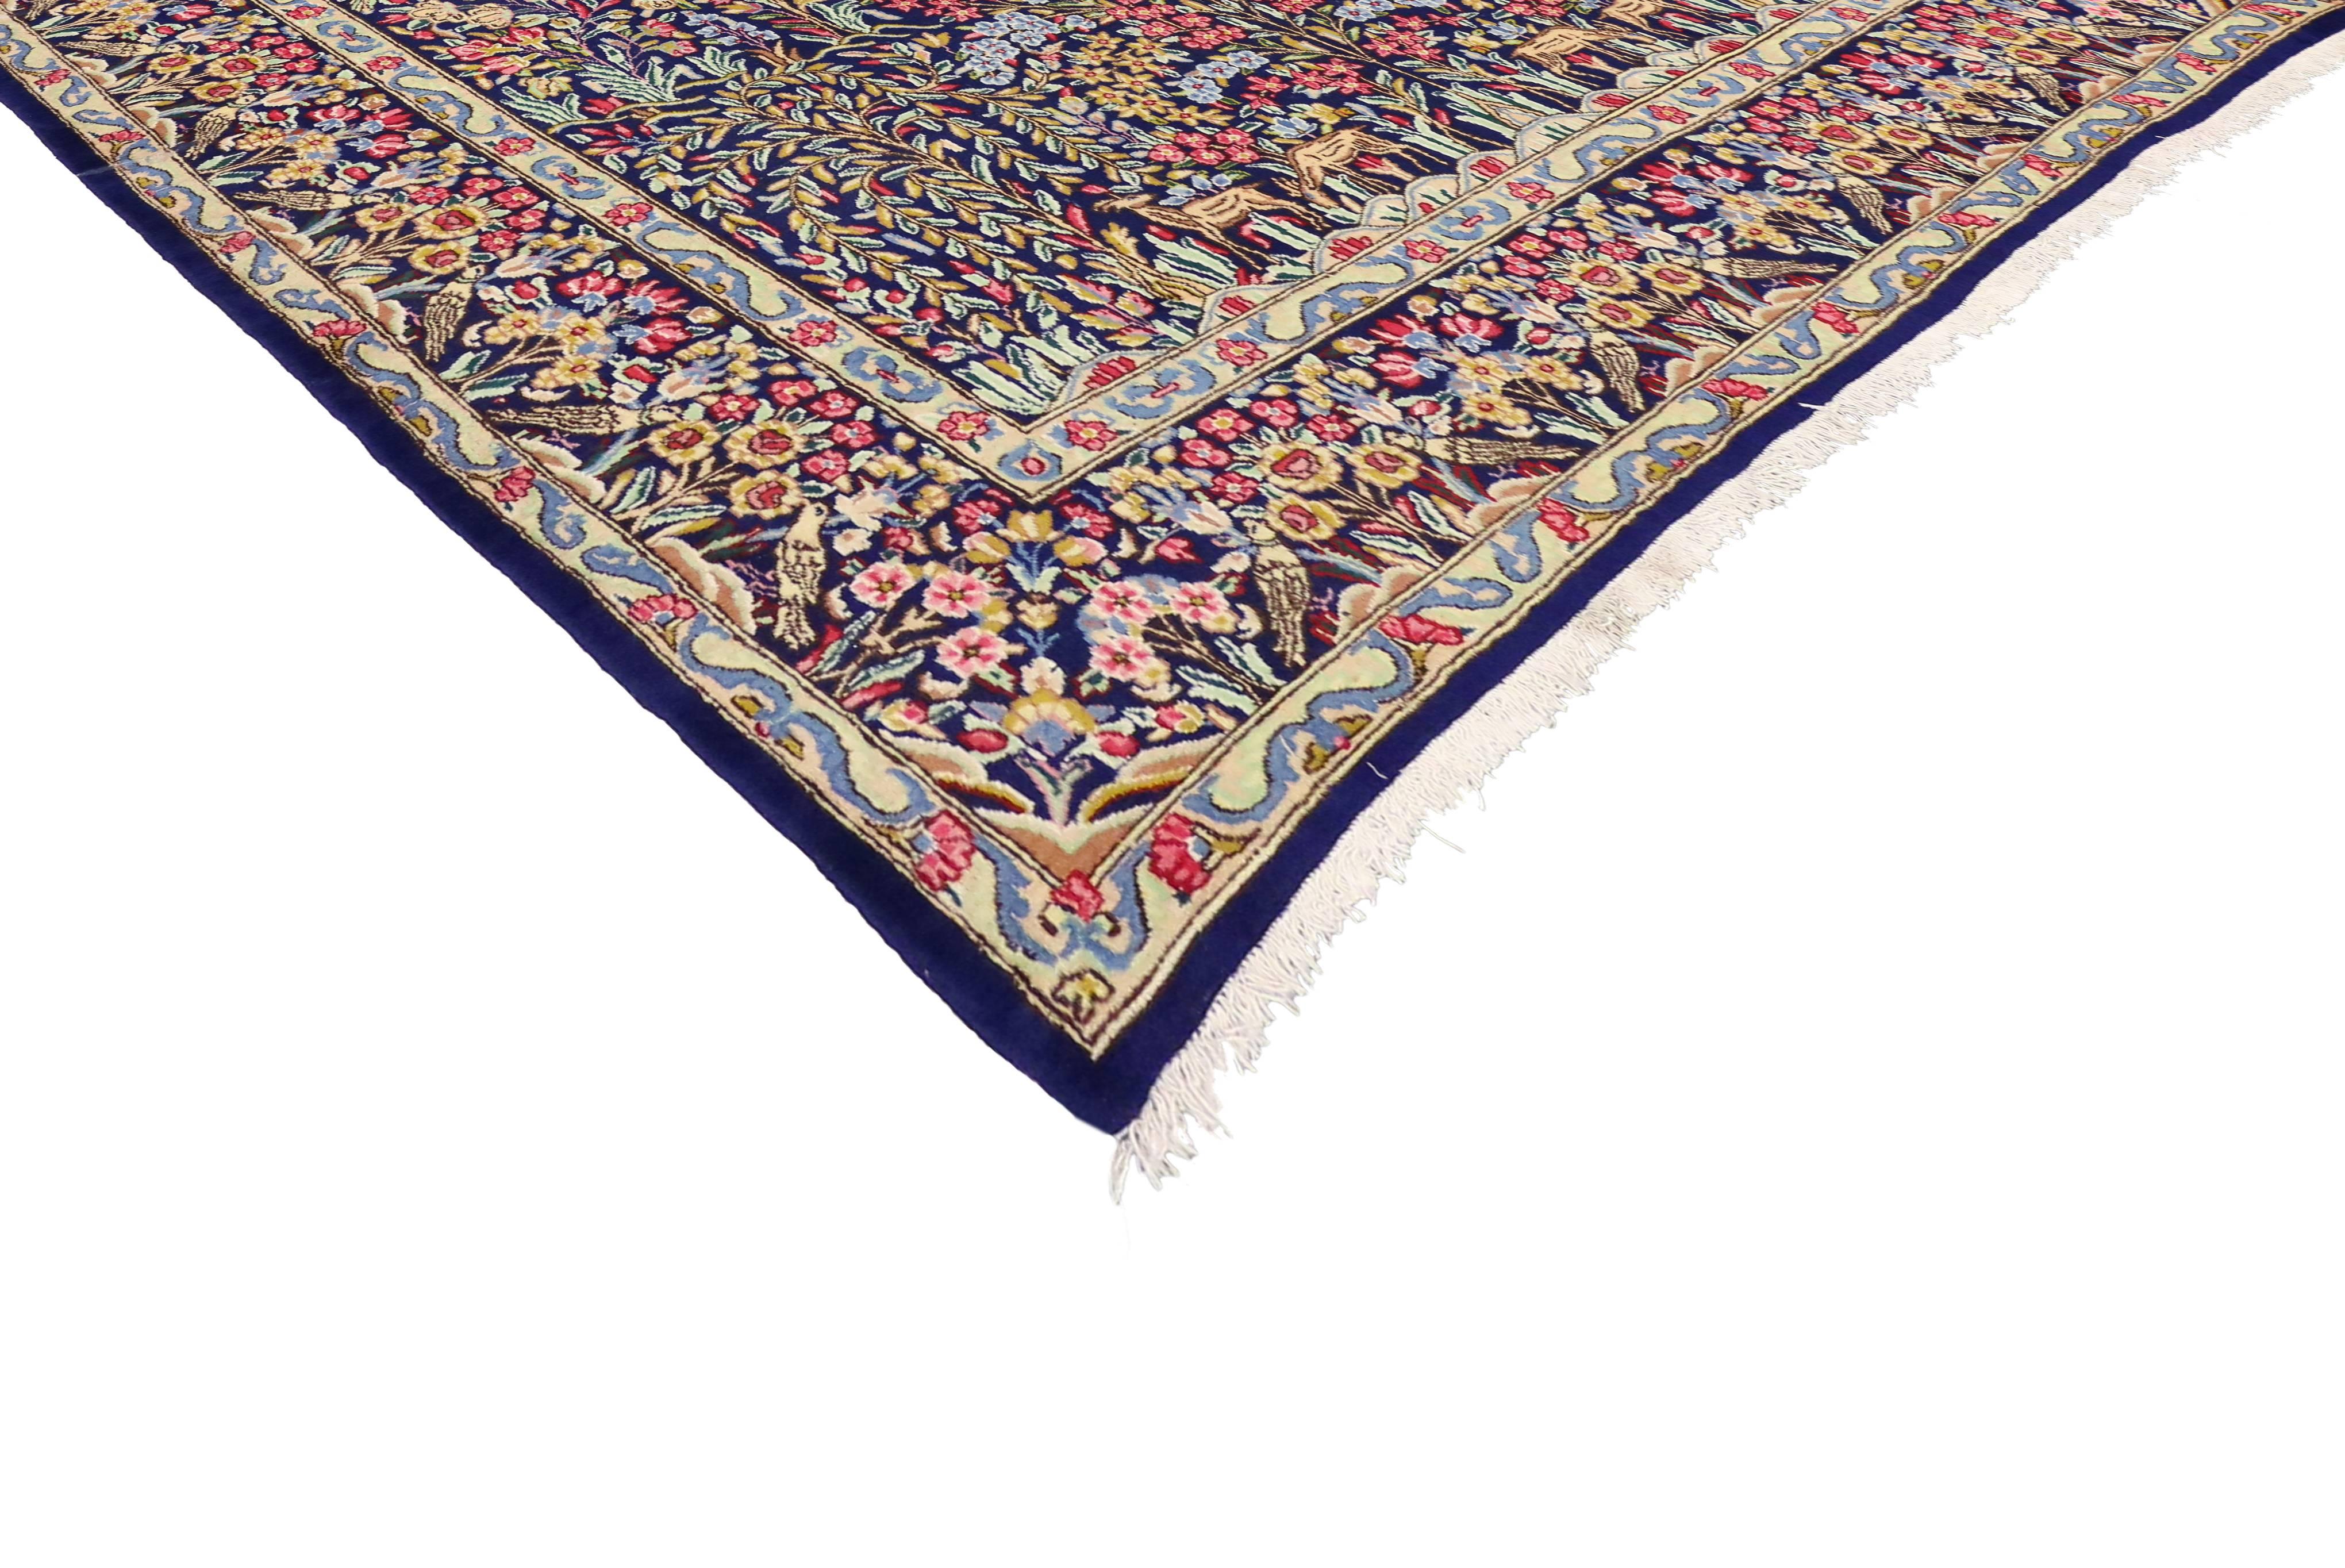 Vintage Persian Kerman Rug with Garden of Paradise Design, Kirman Rug In Excellent Condition For Sale In Dallas, TX